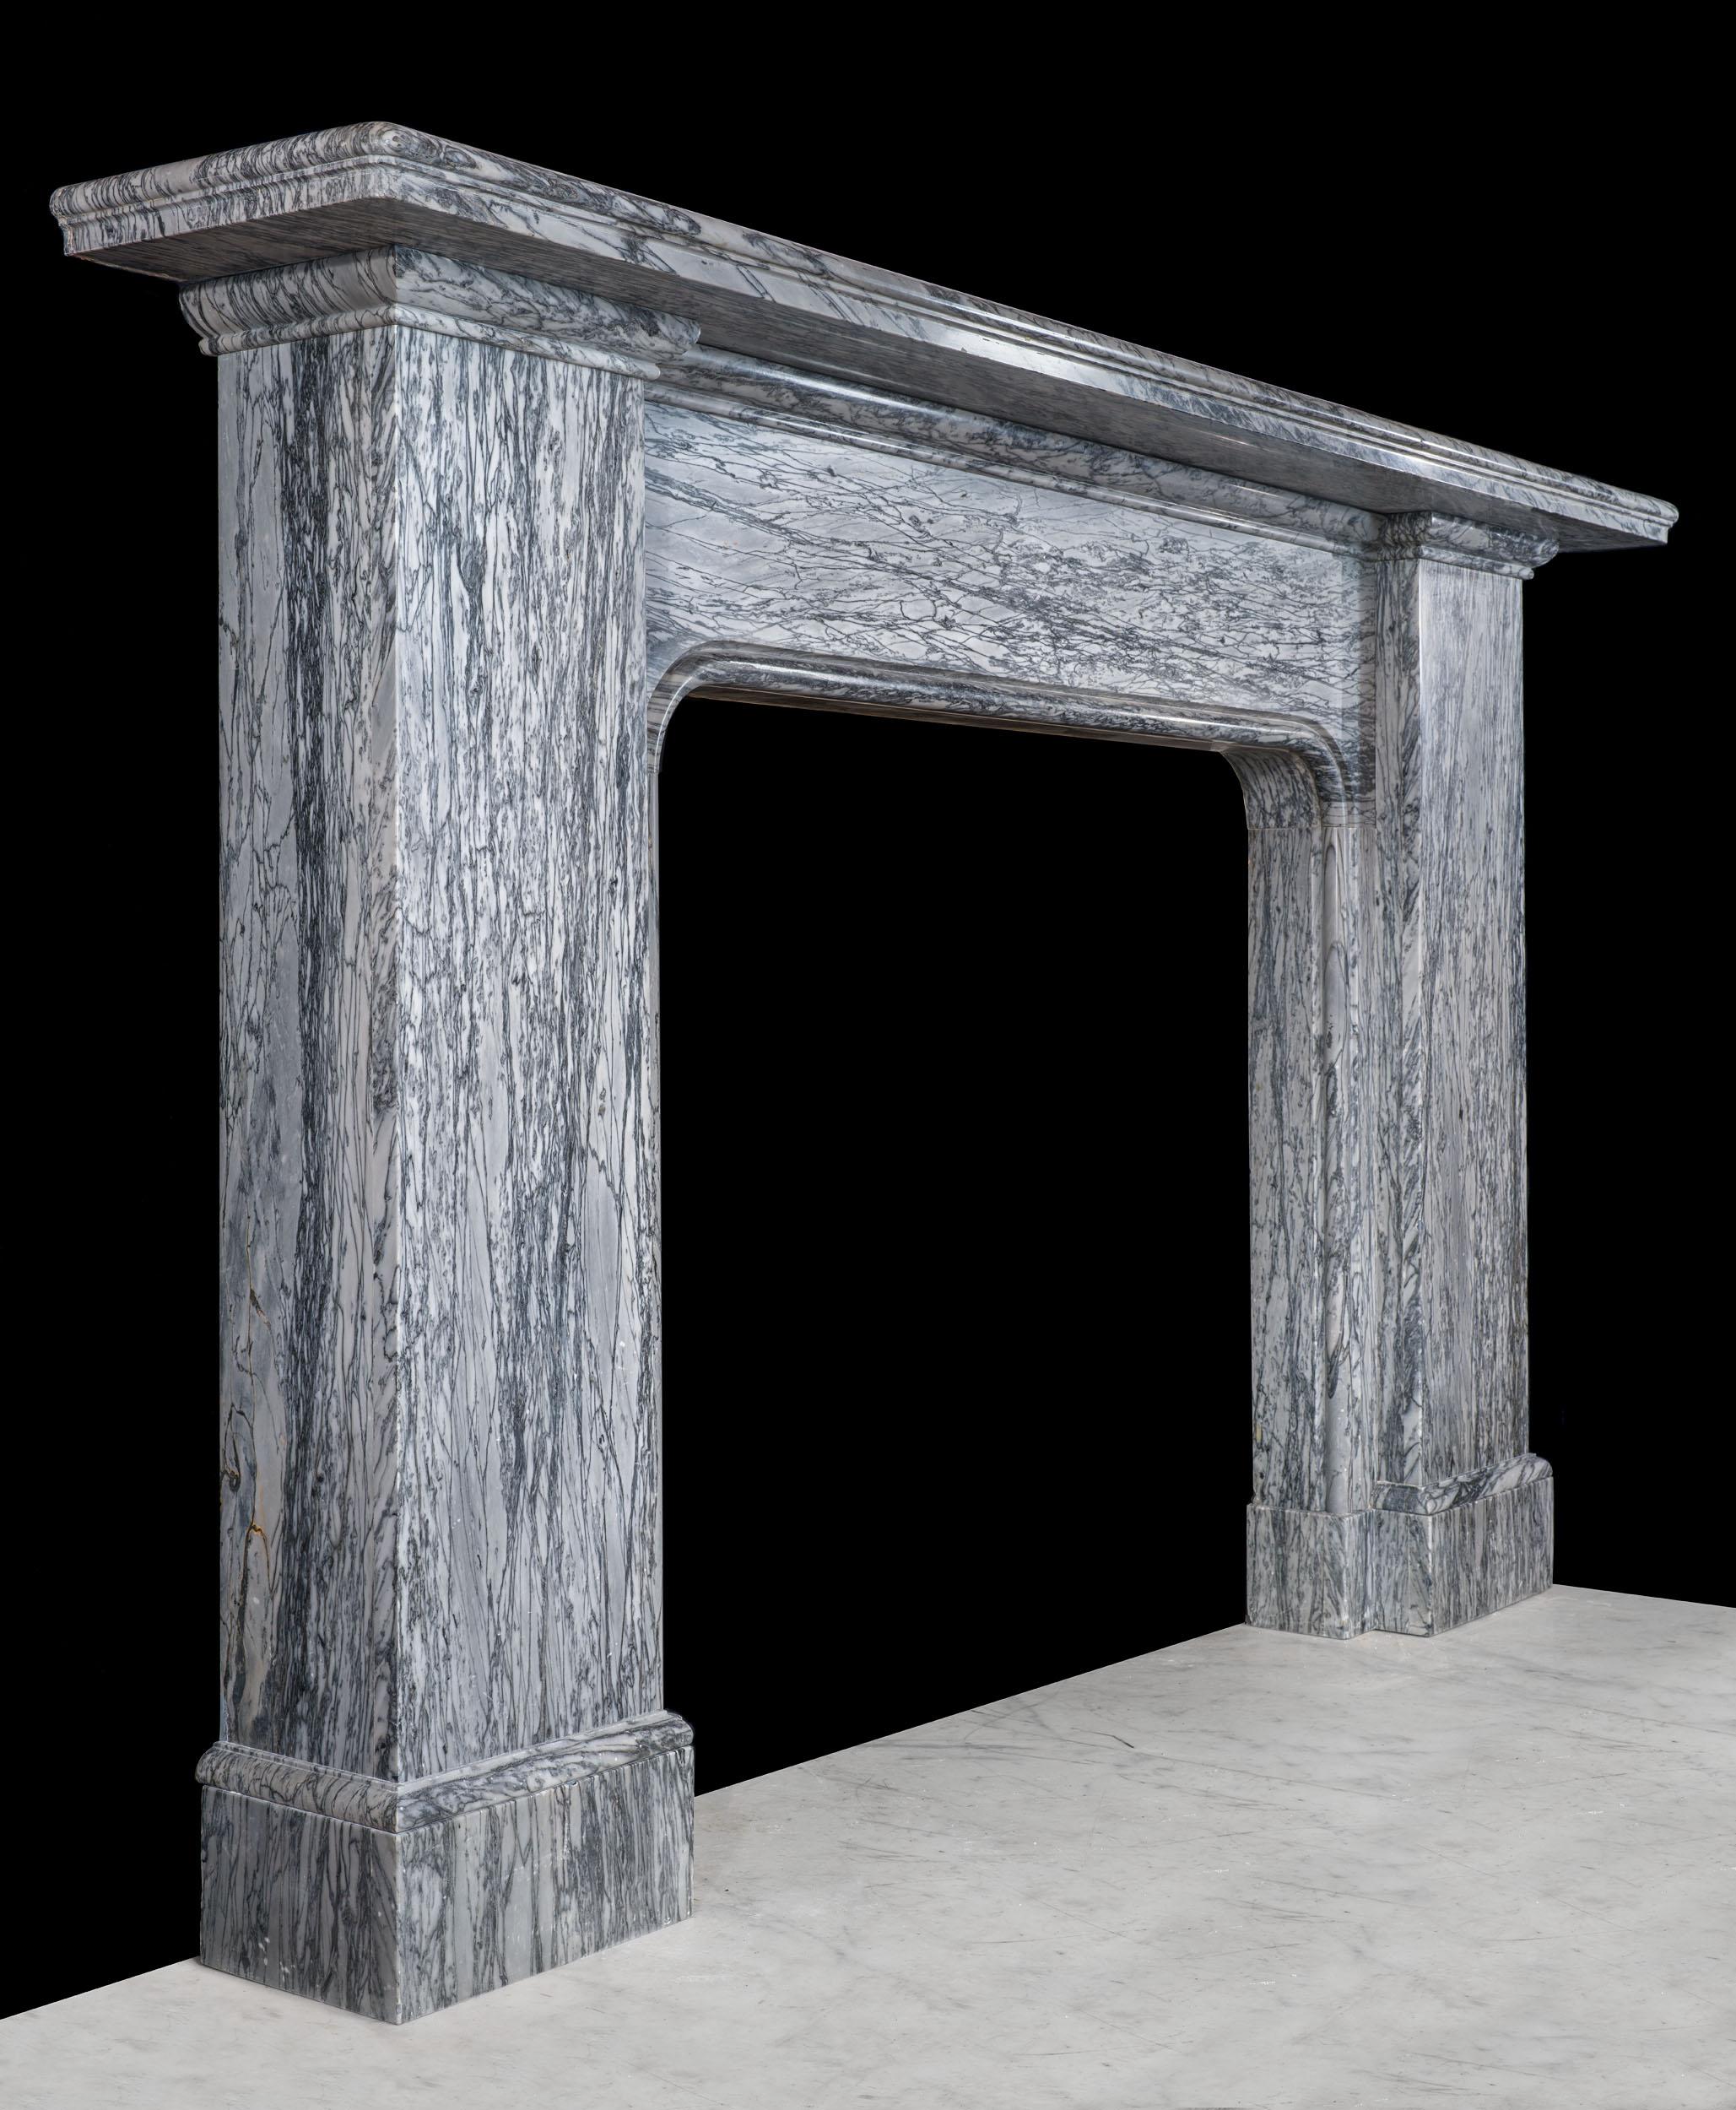 A very fine chimneypiece with a striking simplicity of form, reminiscent of the work of Sir John Soane.Carved from dramatic dove grey Bardiglio Fiorito marble, the wide stepped shelf rests on two monumental jambs, which flank a large opening. One of